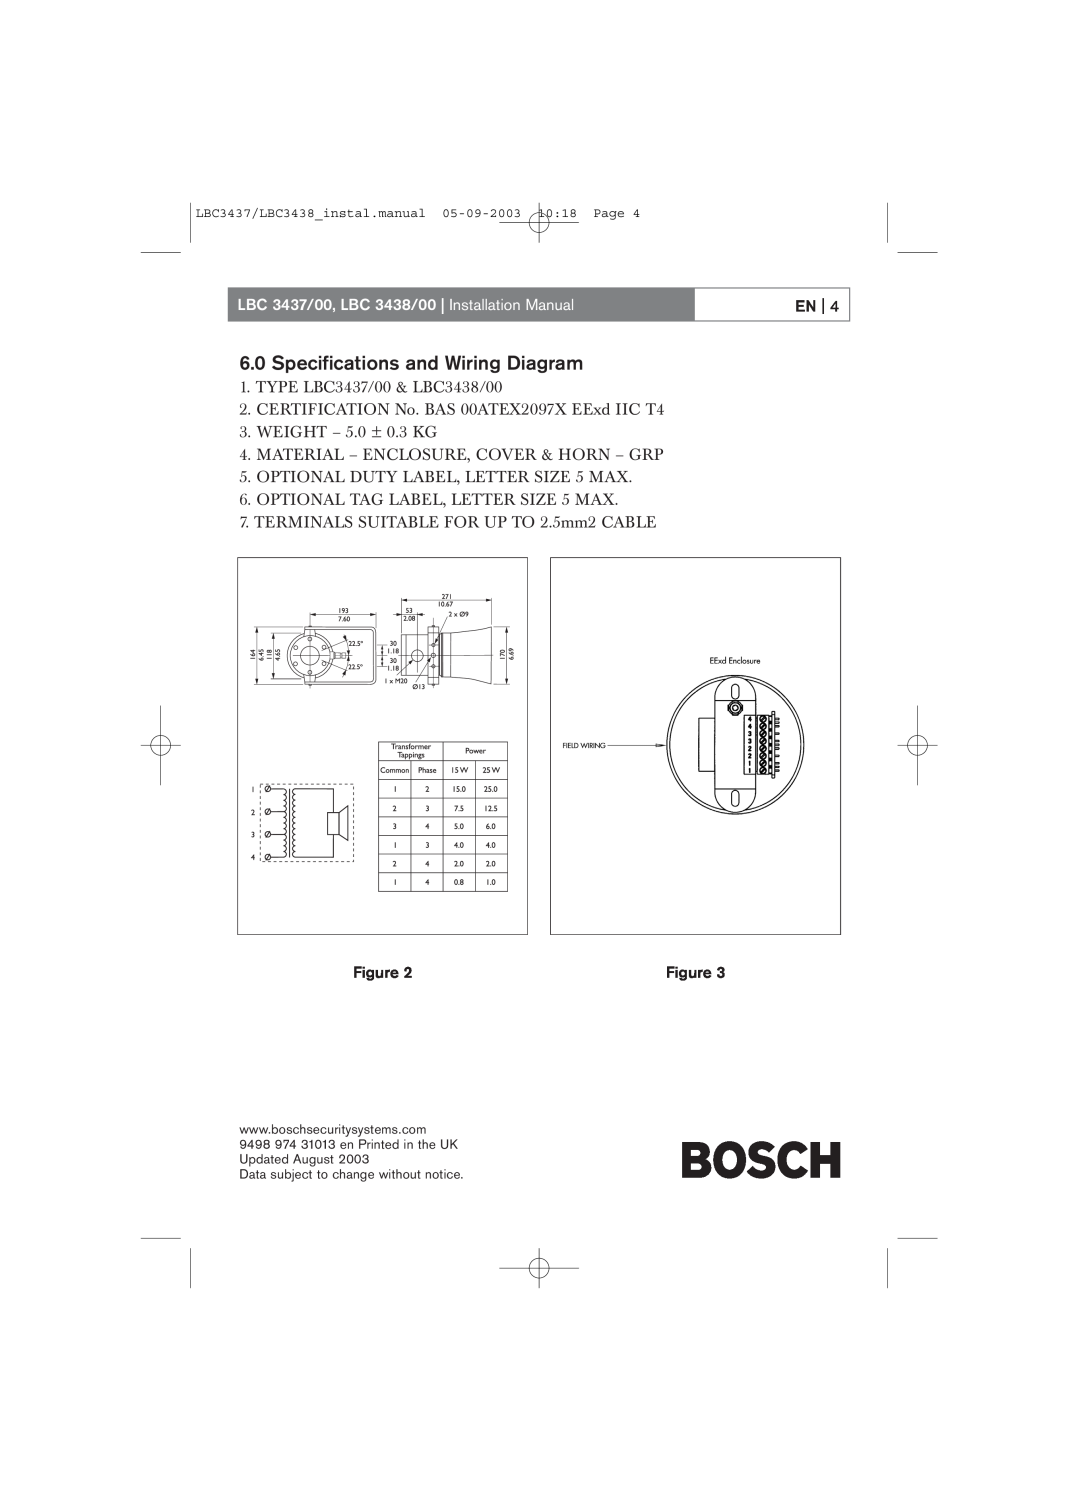 Bosch Appliances installation manual Specifications and Wiring Diagram, LBC 3437/00, LBC 3438/00 Installation Manual 